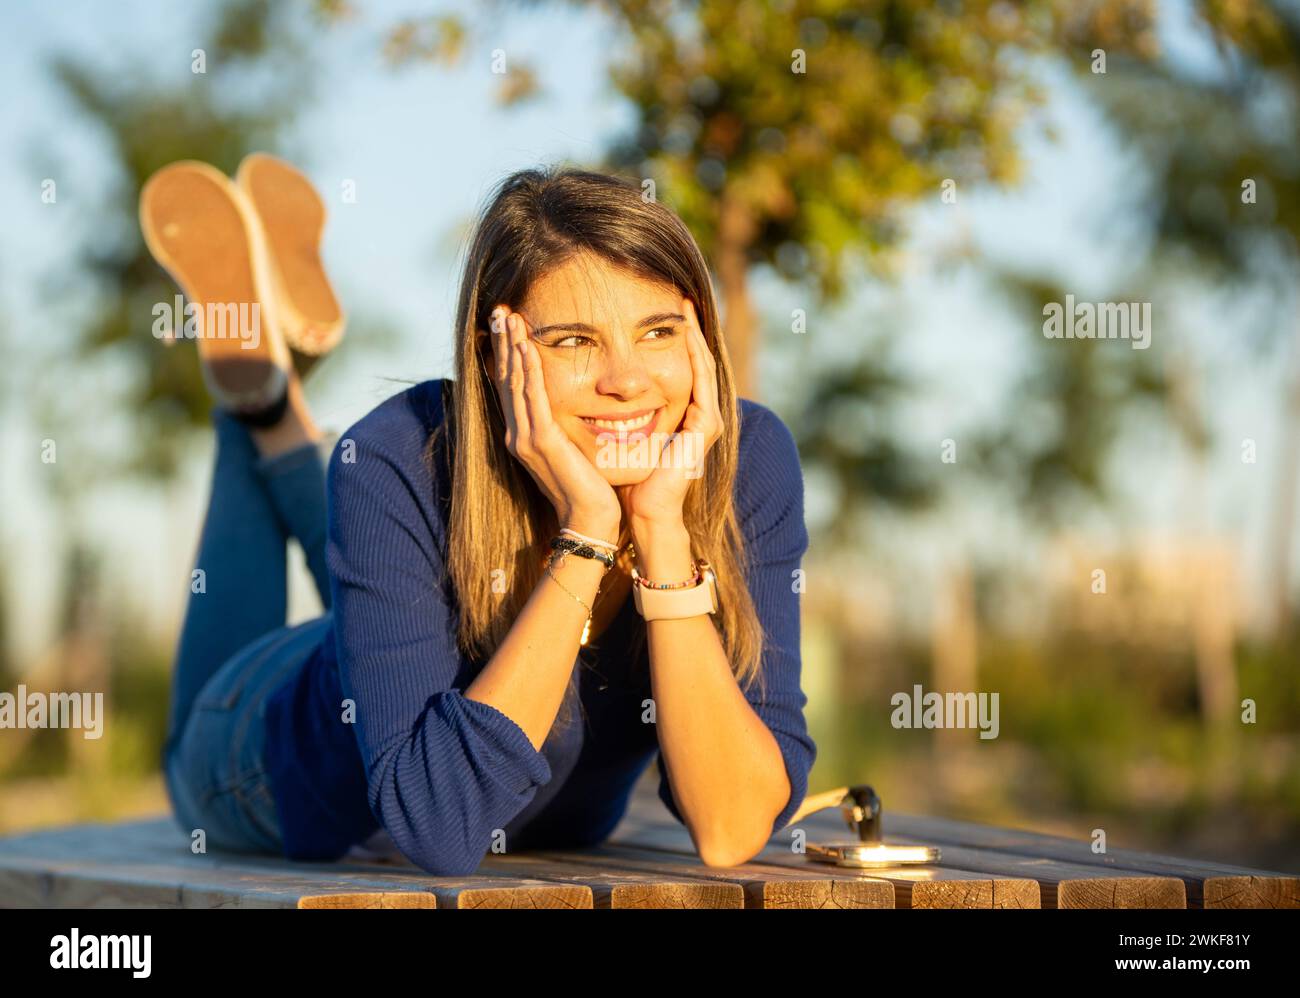 Happy and relaxed woman smiling while lying on a bench outdoors in a park during the sunset. Stock Photo